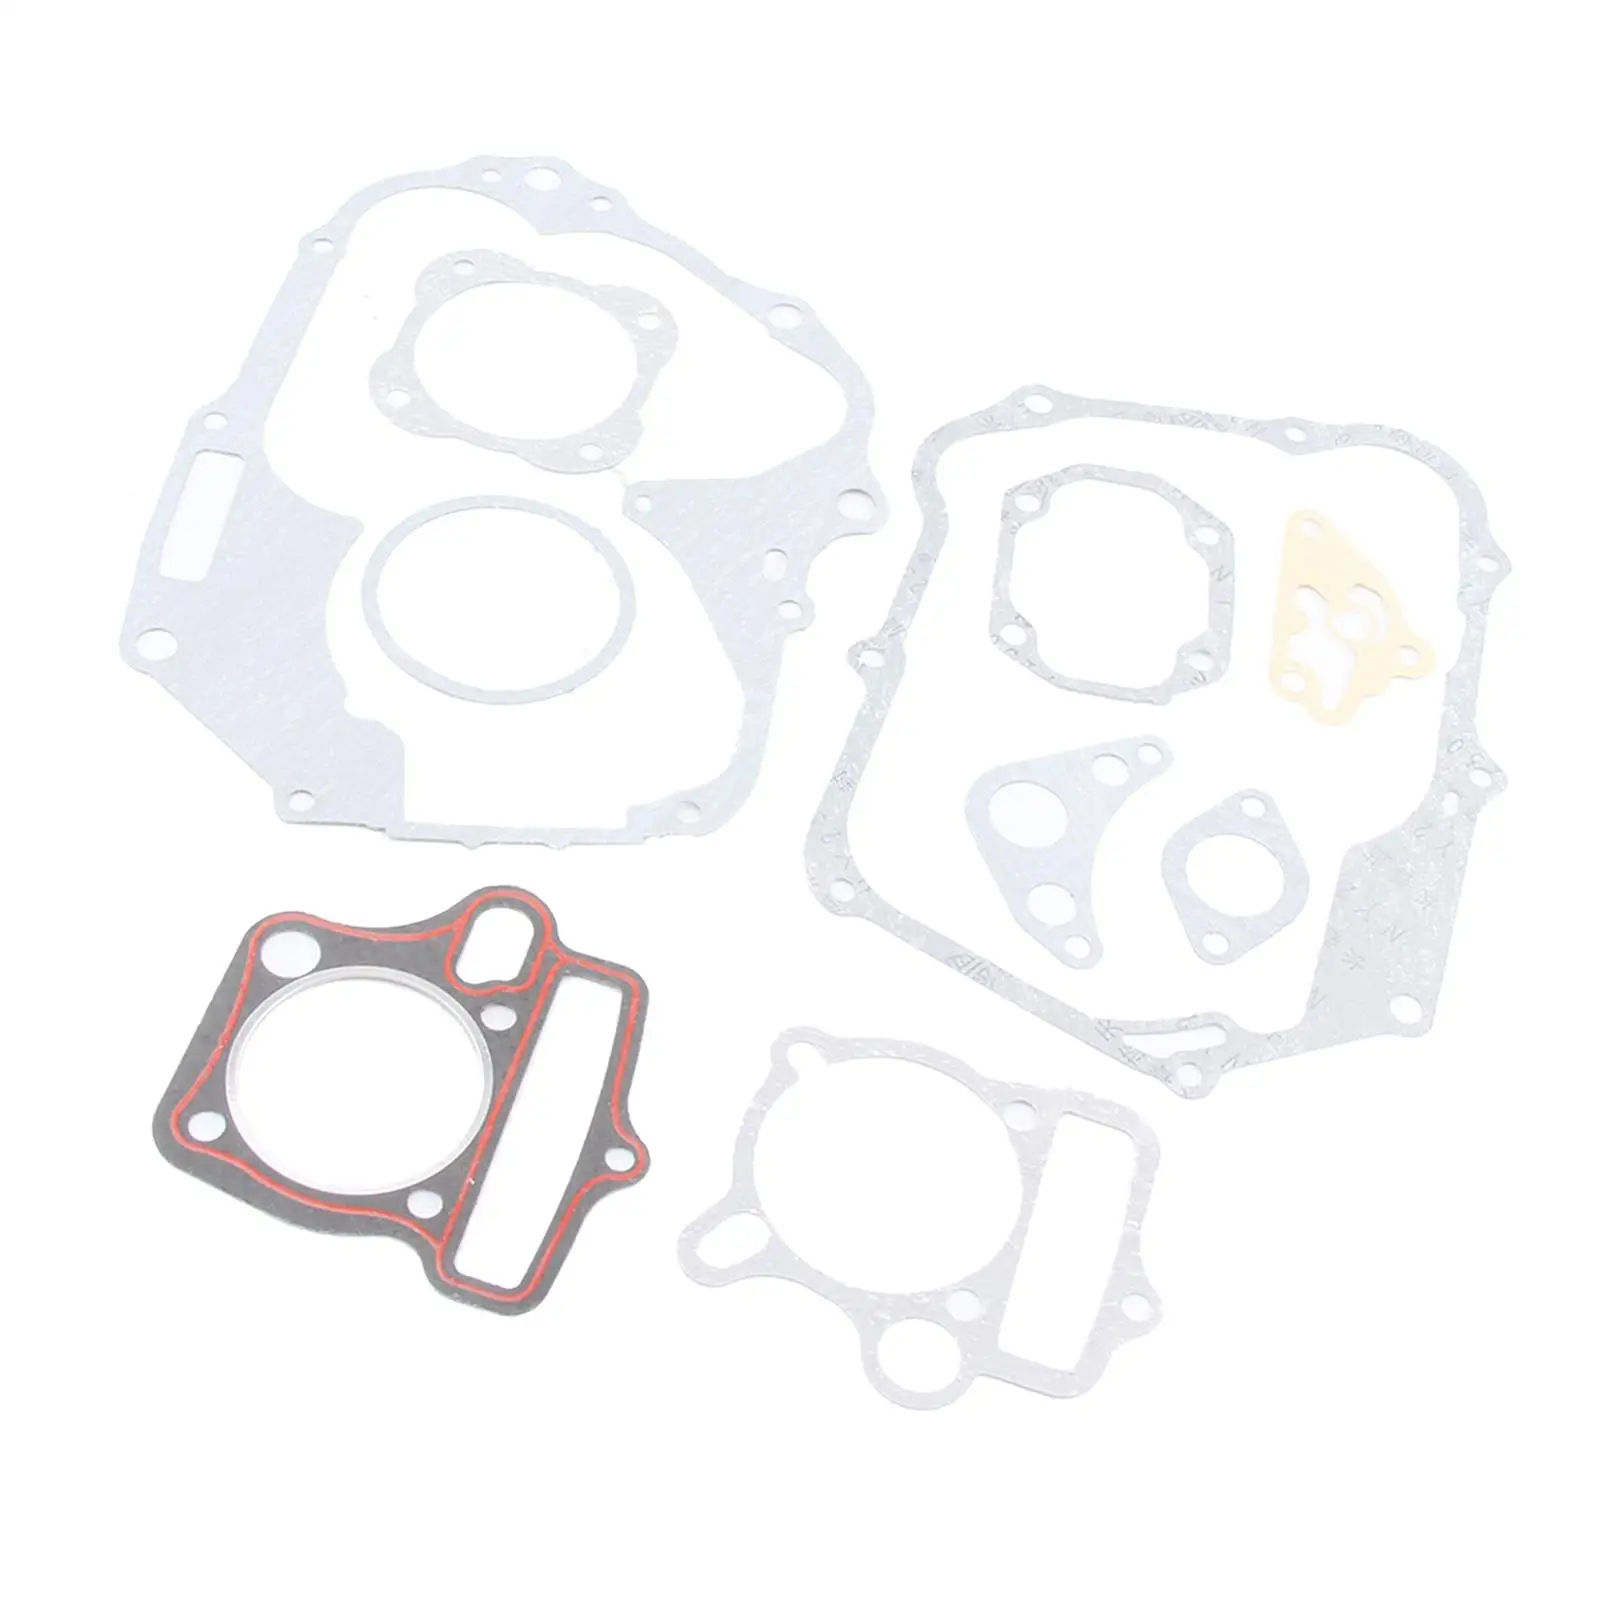 Complete Engine Cylinder Gaskets Set for Chinese 125cc Motorcycle